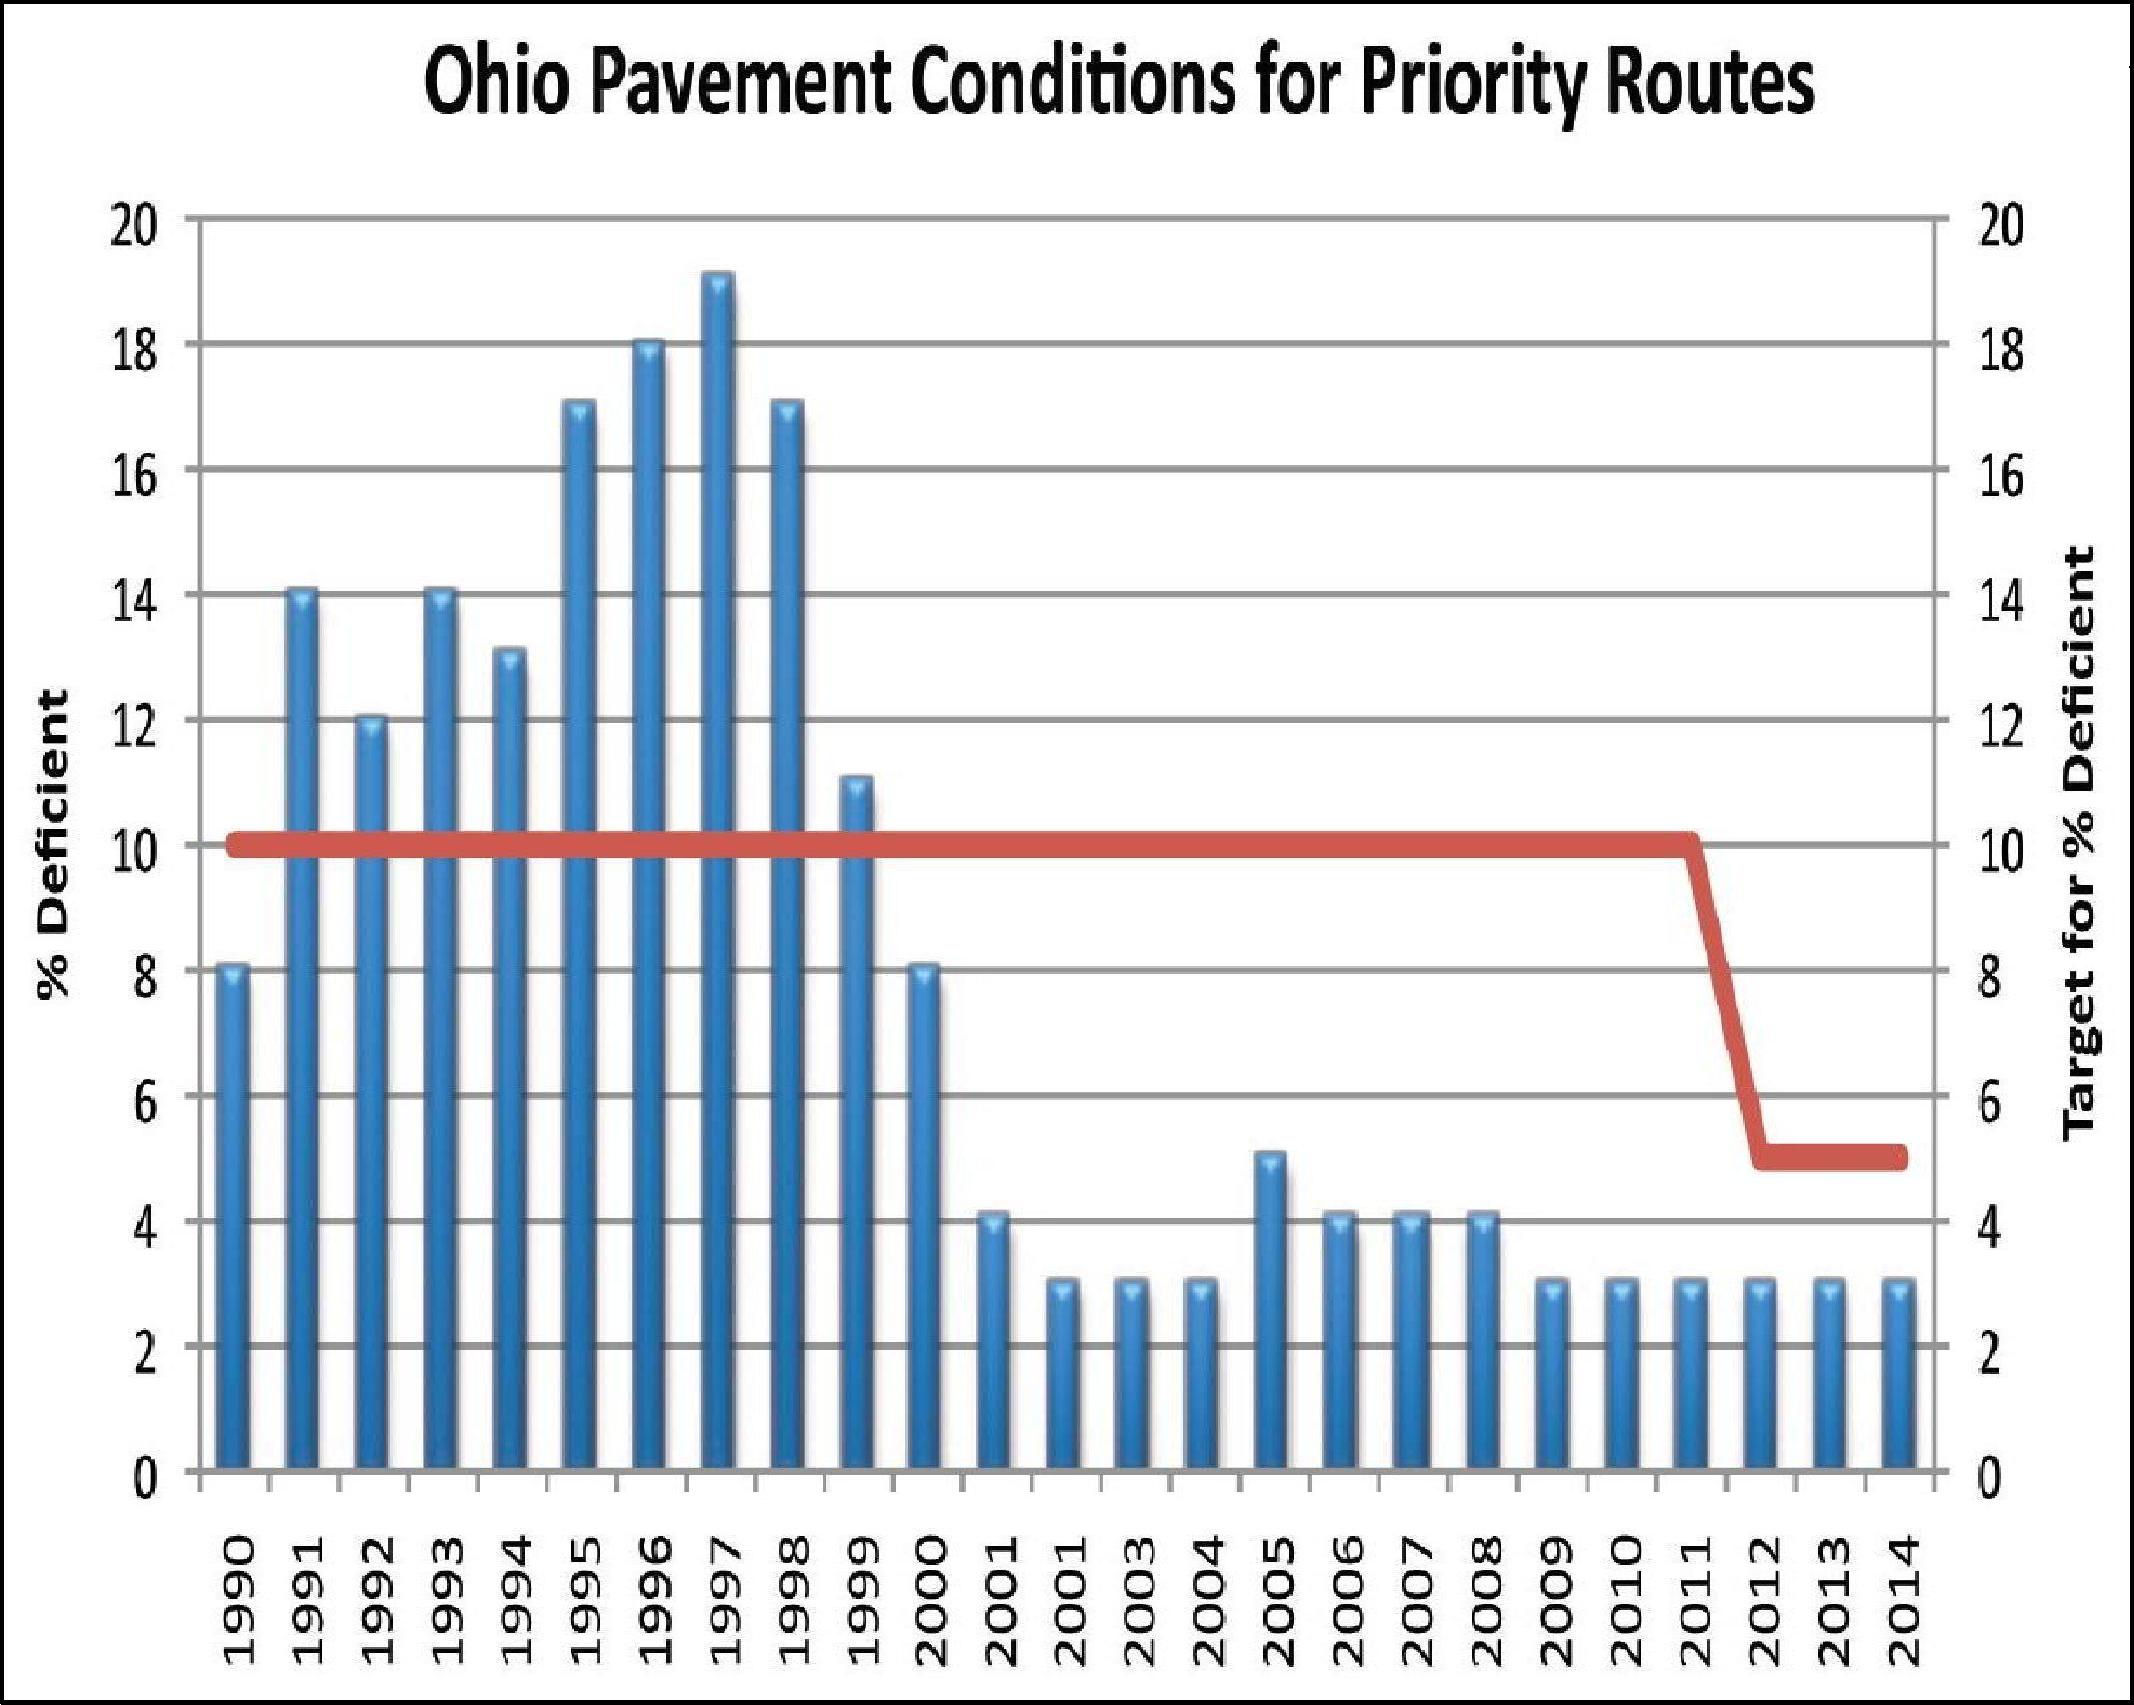 Figure 18 is another bar chart that has verticle bars indicating the percentage of Ohio's priority routes that had deficient pavements. The chart covers the period from 1990 to 2014. It illustrates that in the 1990s, the percentage of pavements that were deficient increased substantially from 8 percent in 1990 to nearly 19 percent in 1997.  The department then steadily reduced pavement deficiencies until they reached the low levels illustrated in Figure 17. By 2001, the percentage of deficient pavements was as low as 3 percent. The chart also has a horizontal trend line that illustrates the pavement condition target. The target was to have no more than 10 percent of the pavements deficient from 1990 through 2011 falling to 5 percent beginning in 2012.